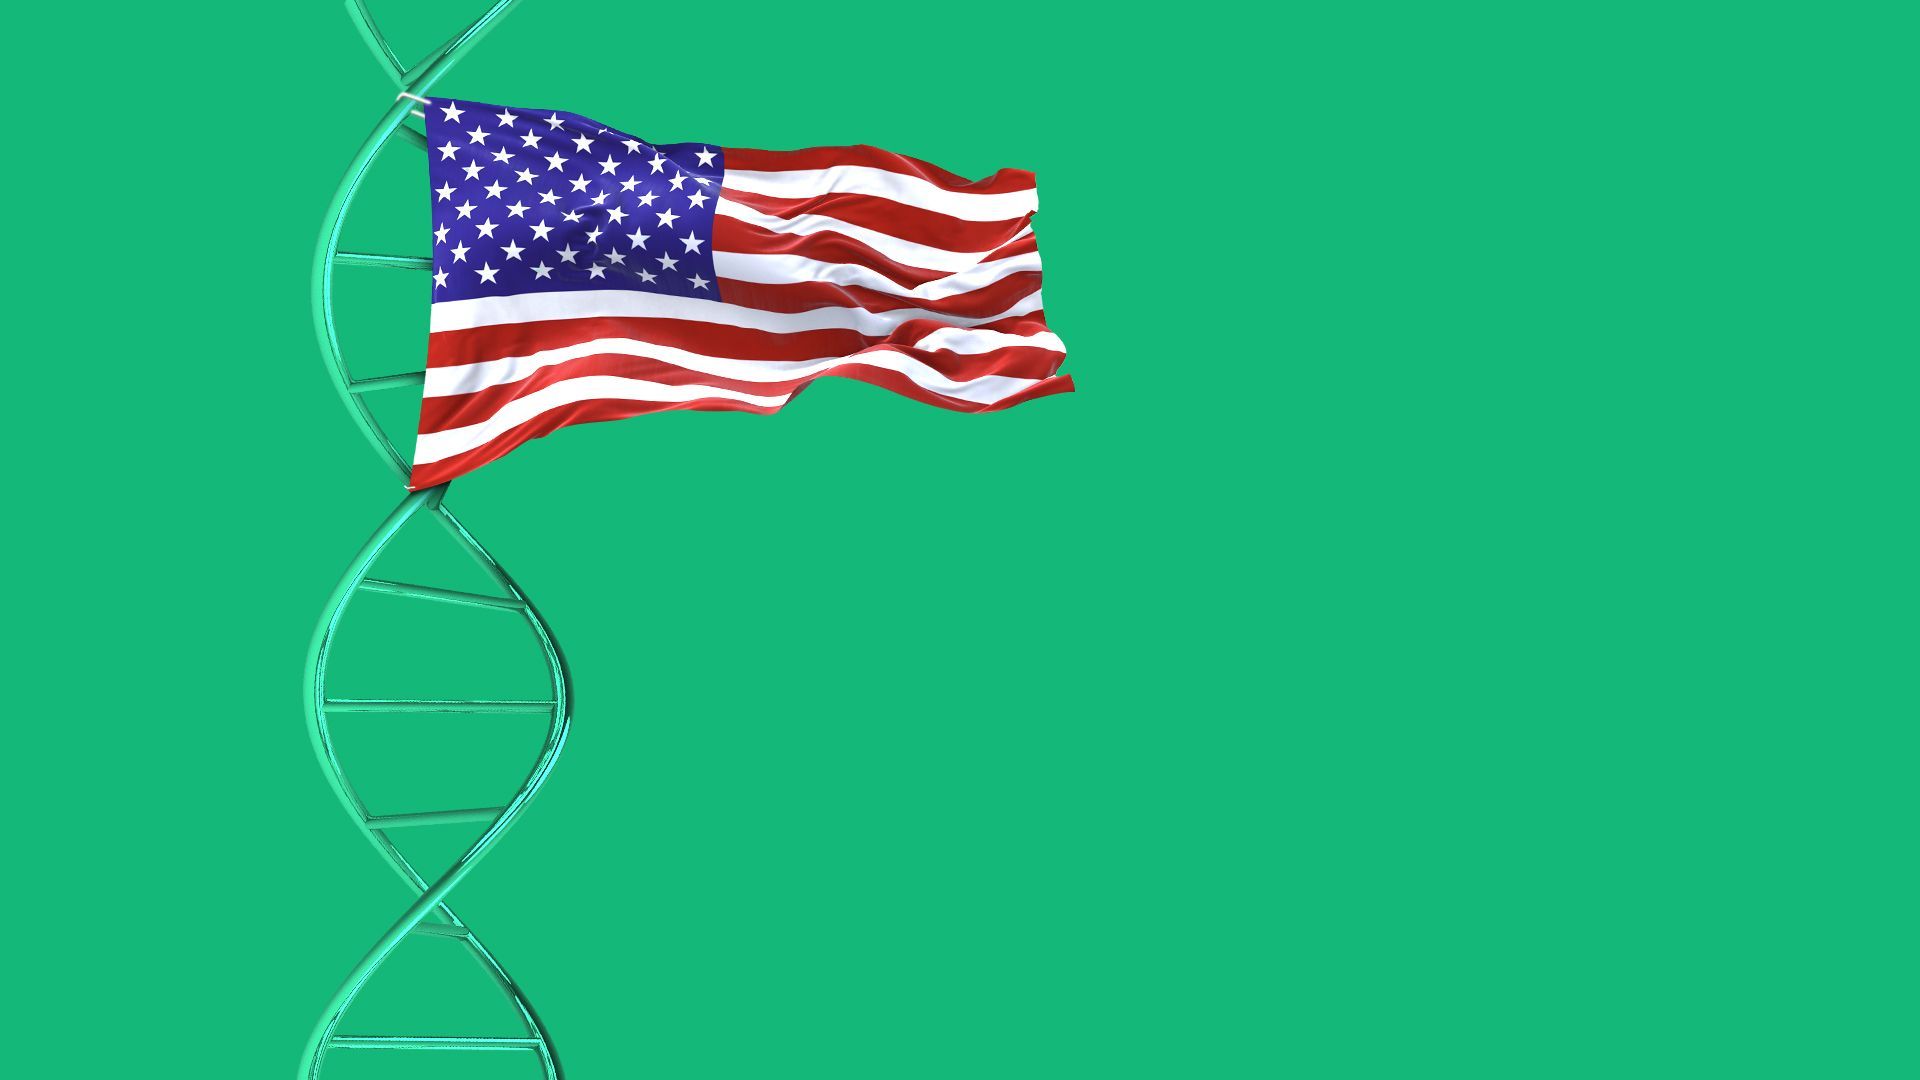 Illustration of a dna strand as a flagpole with an American flag at the top